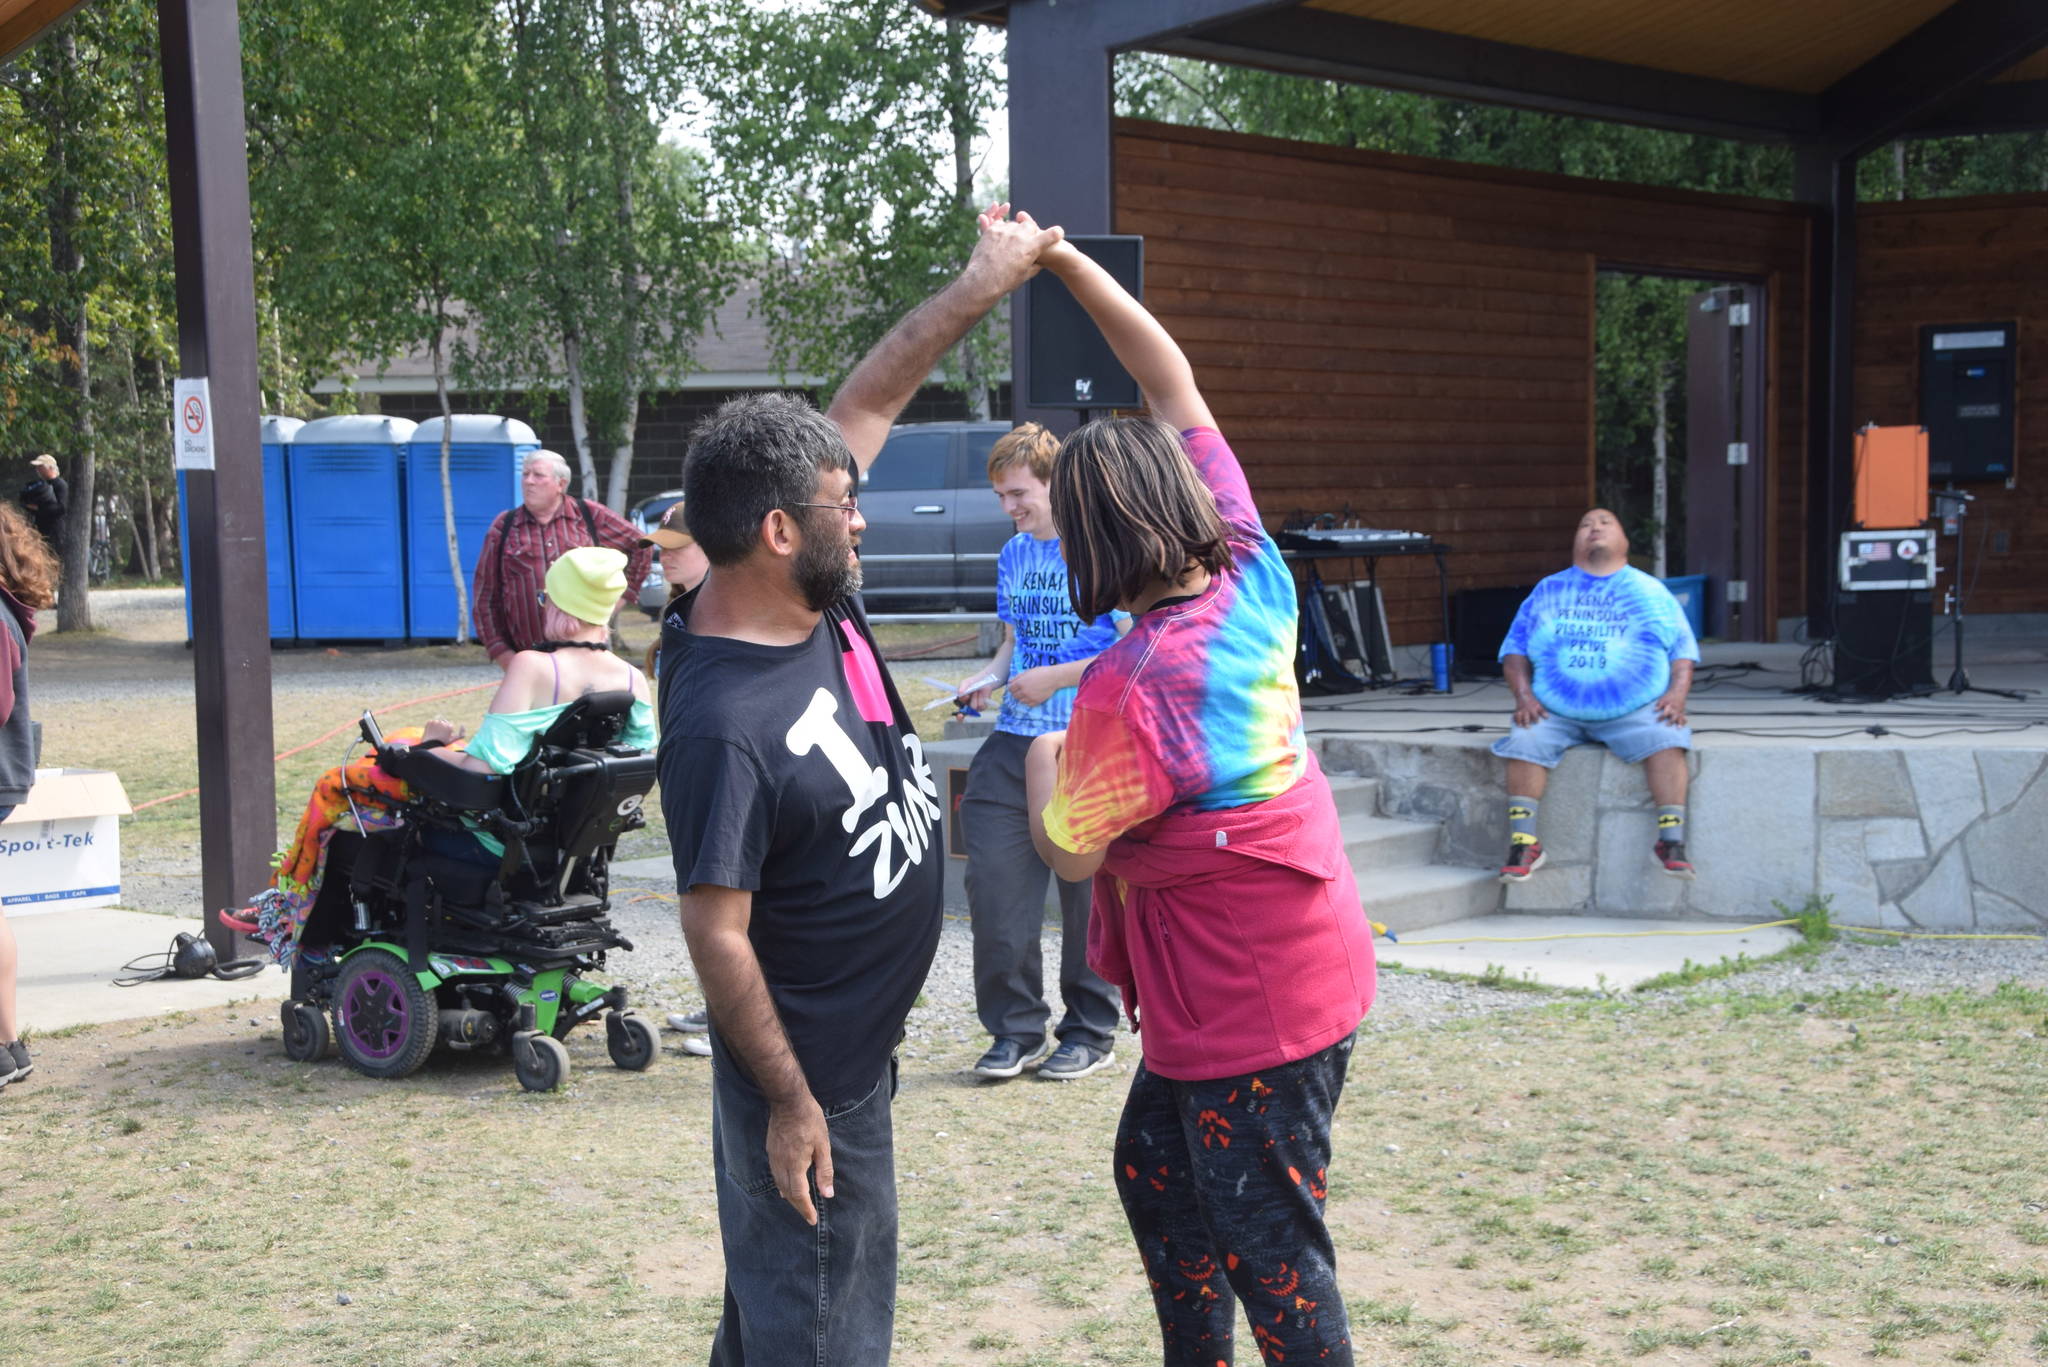 Roger Randall and Molly Joseph dance to the music of Hot Mess during the 2019 Disability Pride Celebration in Soldotna Creek Park on July 20, 2019. (Photo by Brian Mazurek/Peninsula Clarion)